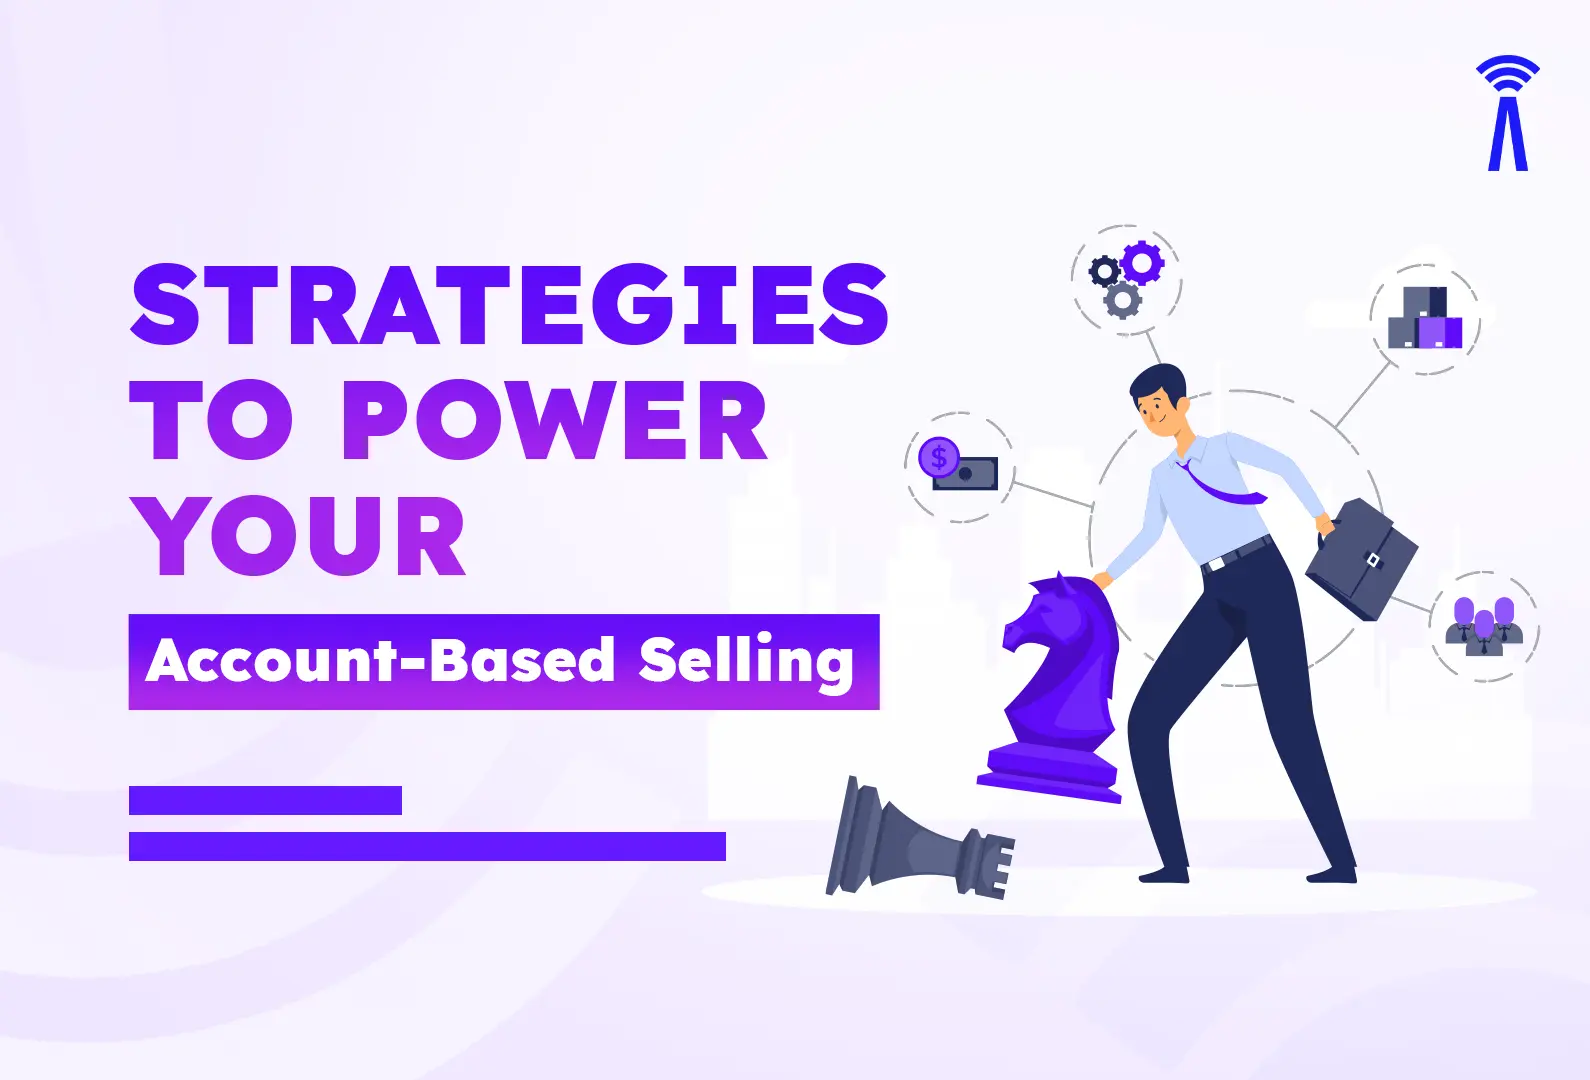 Strategies to Power Your Account-Based Selling